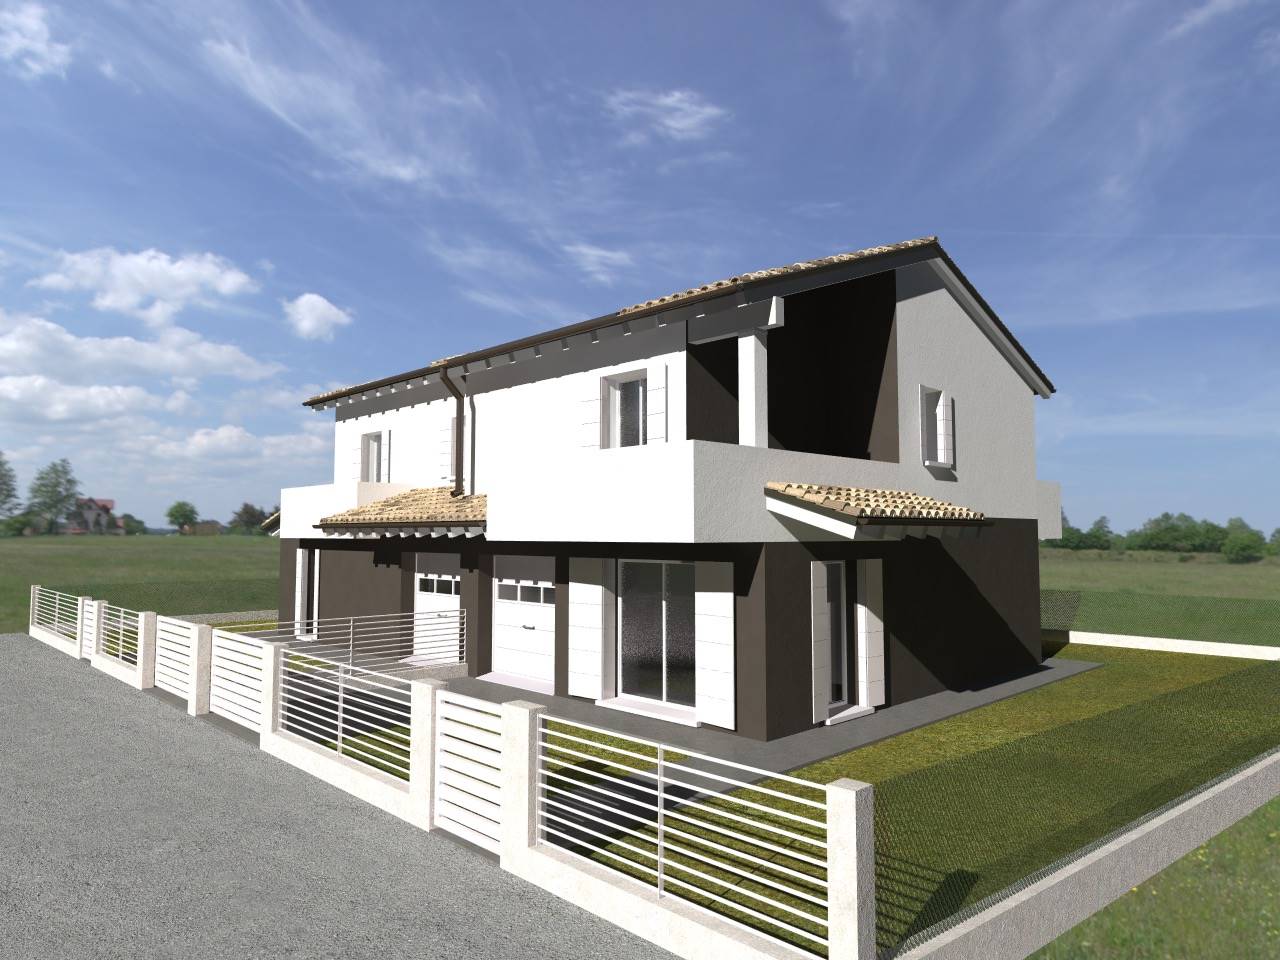 ROBEGANO, SALZANO, Duplex villa for sale, New construction, Heating To floor, Energetic class: A4, placed at Ground on 1, composed by: 4 Rooms, 